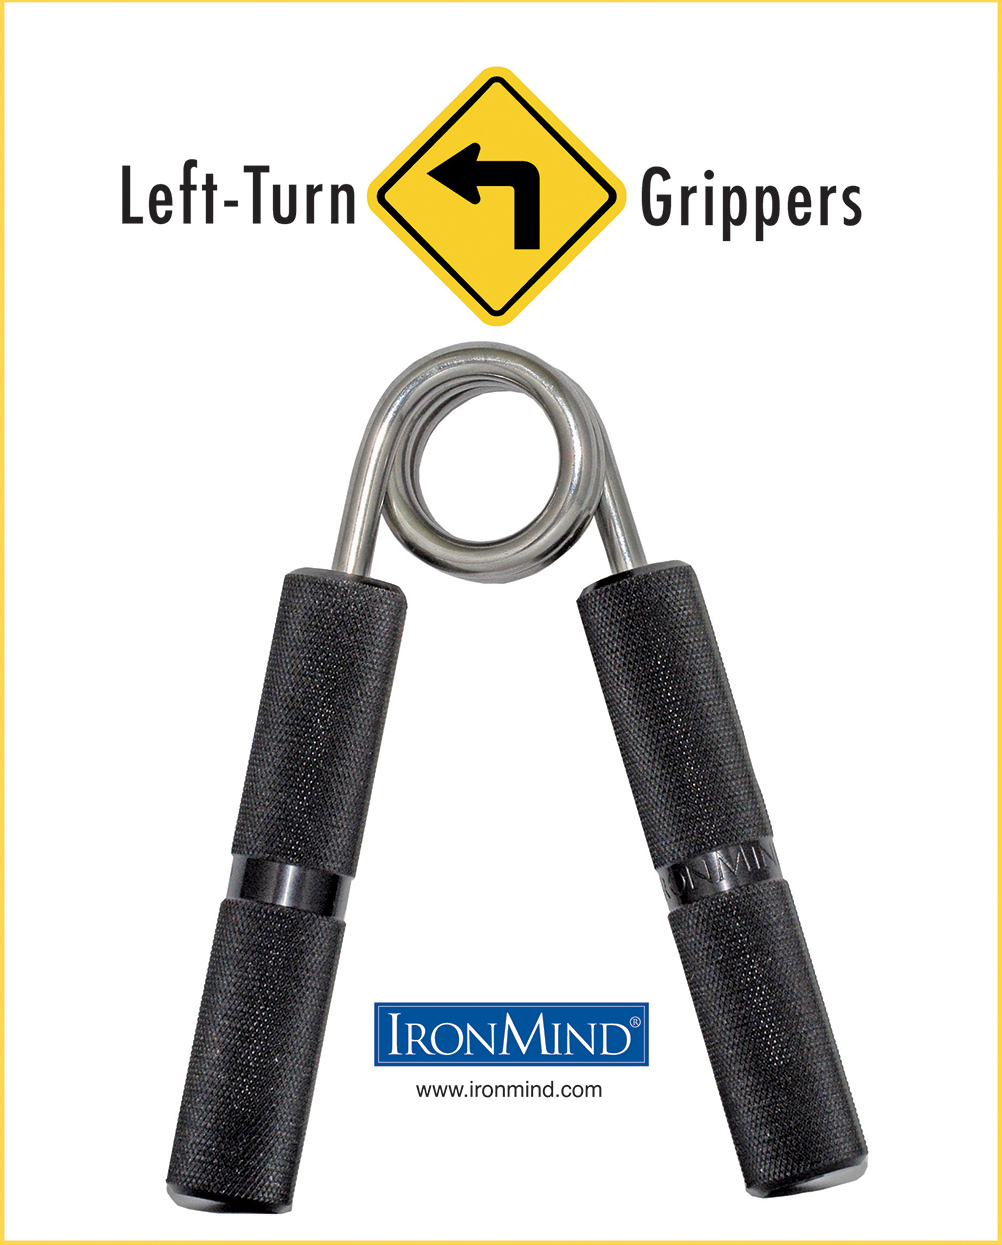 99.9% of people who train with grippers think they feel fine in both hands, but if you think your left hand has gotten short shrift, meet IronMind's Left-Turn grippers. They feature: IronMind's proprietary GR8-L™ springs: precise, durable, good-looking; Black anodized aircraft-grade aluminum handles; Precision manufacturing and peerless build quality for world-class performance; IronMind® stamped in the clear band mid-handle and model at the end of the handle Captains of Crush Compatible (CoC2).